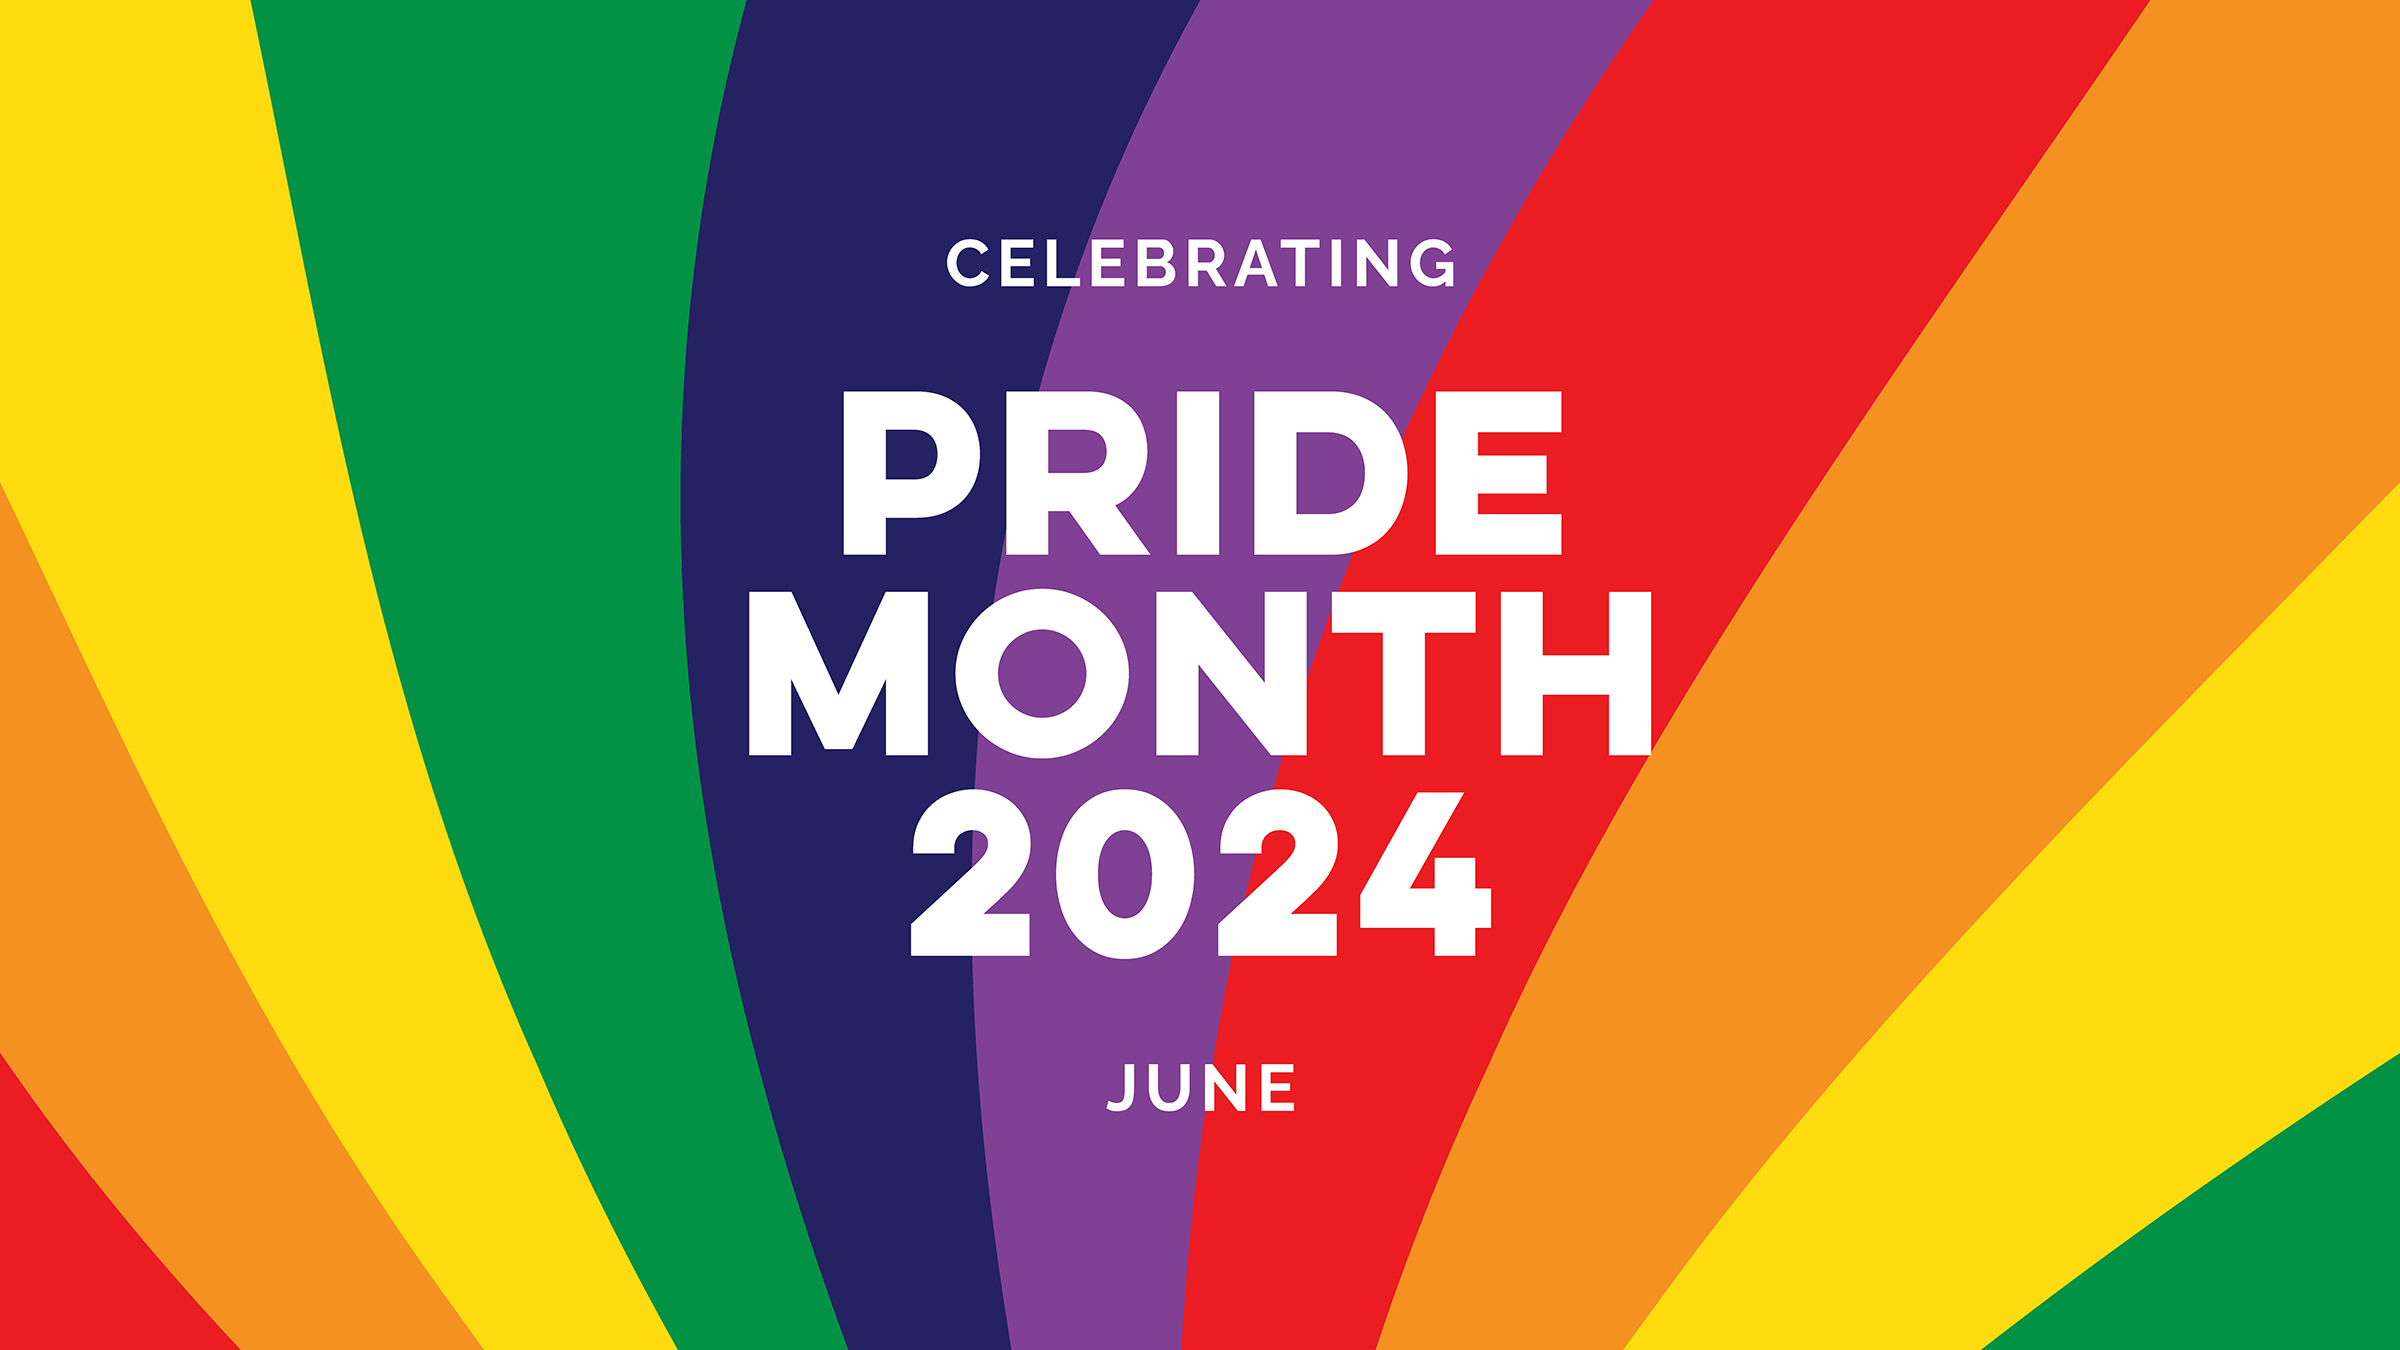 Celebrating Pride Month 2024 with rainbow flag